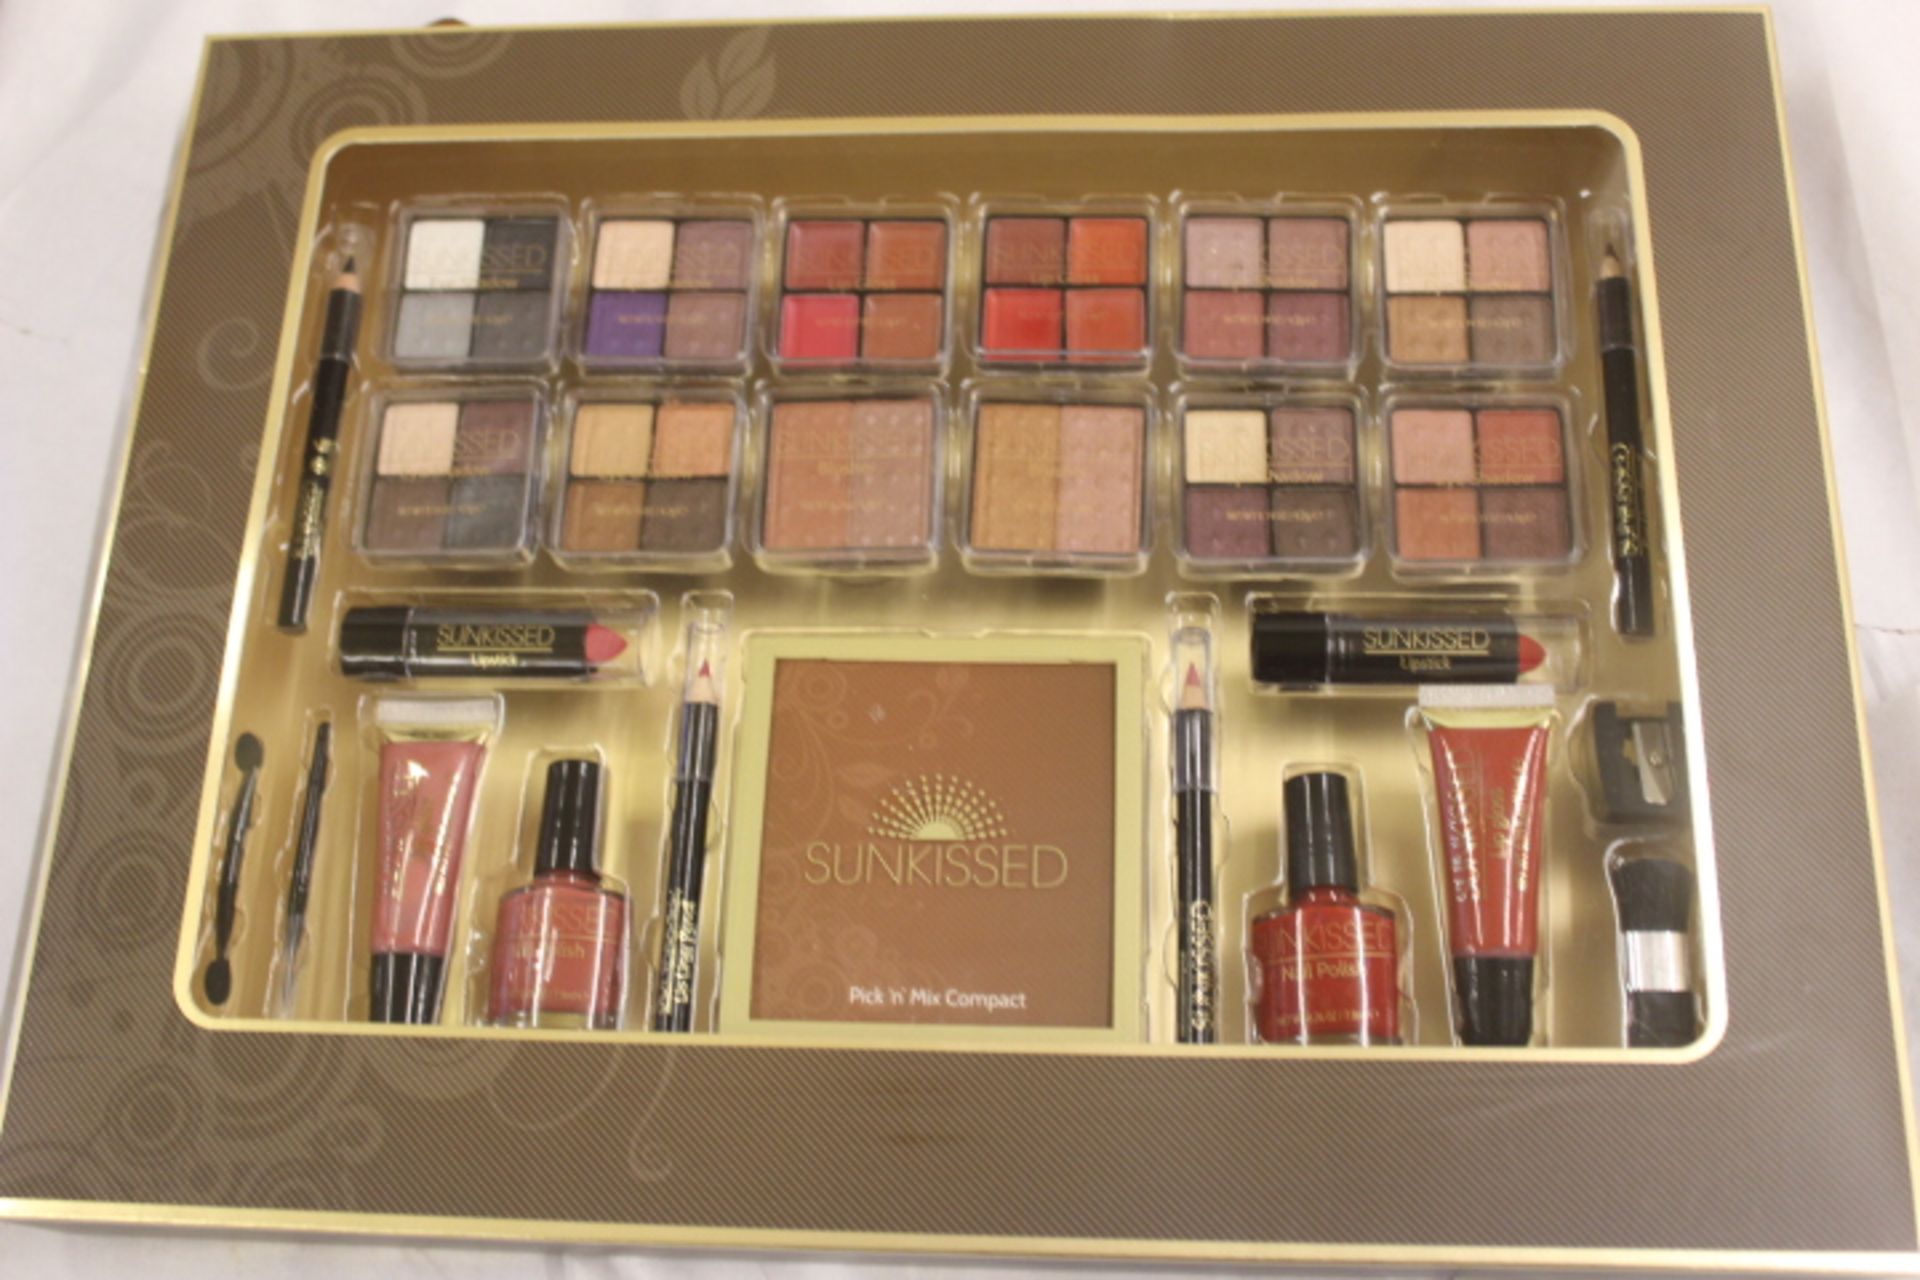 V Sunkissed Beautiful & Bronzed Gift Set RRP £39.95